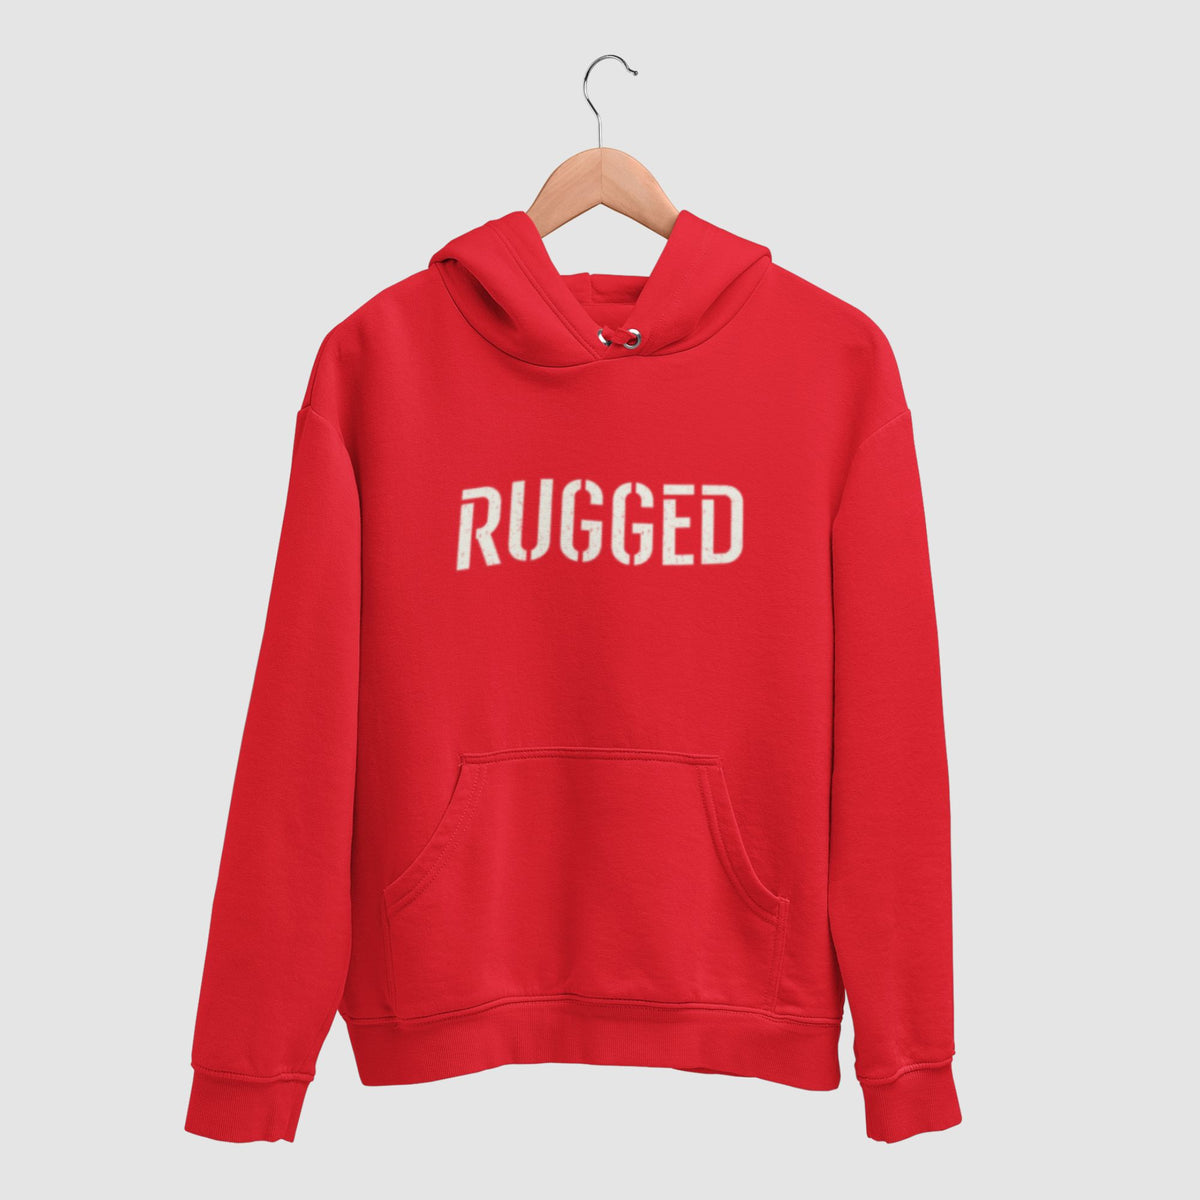 rugged-cotton-printed-unisex-red-hoodie-for-men-for-women-gogirgit-com #color_red